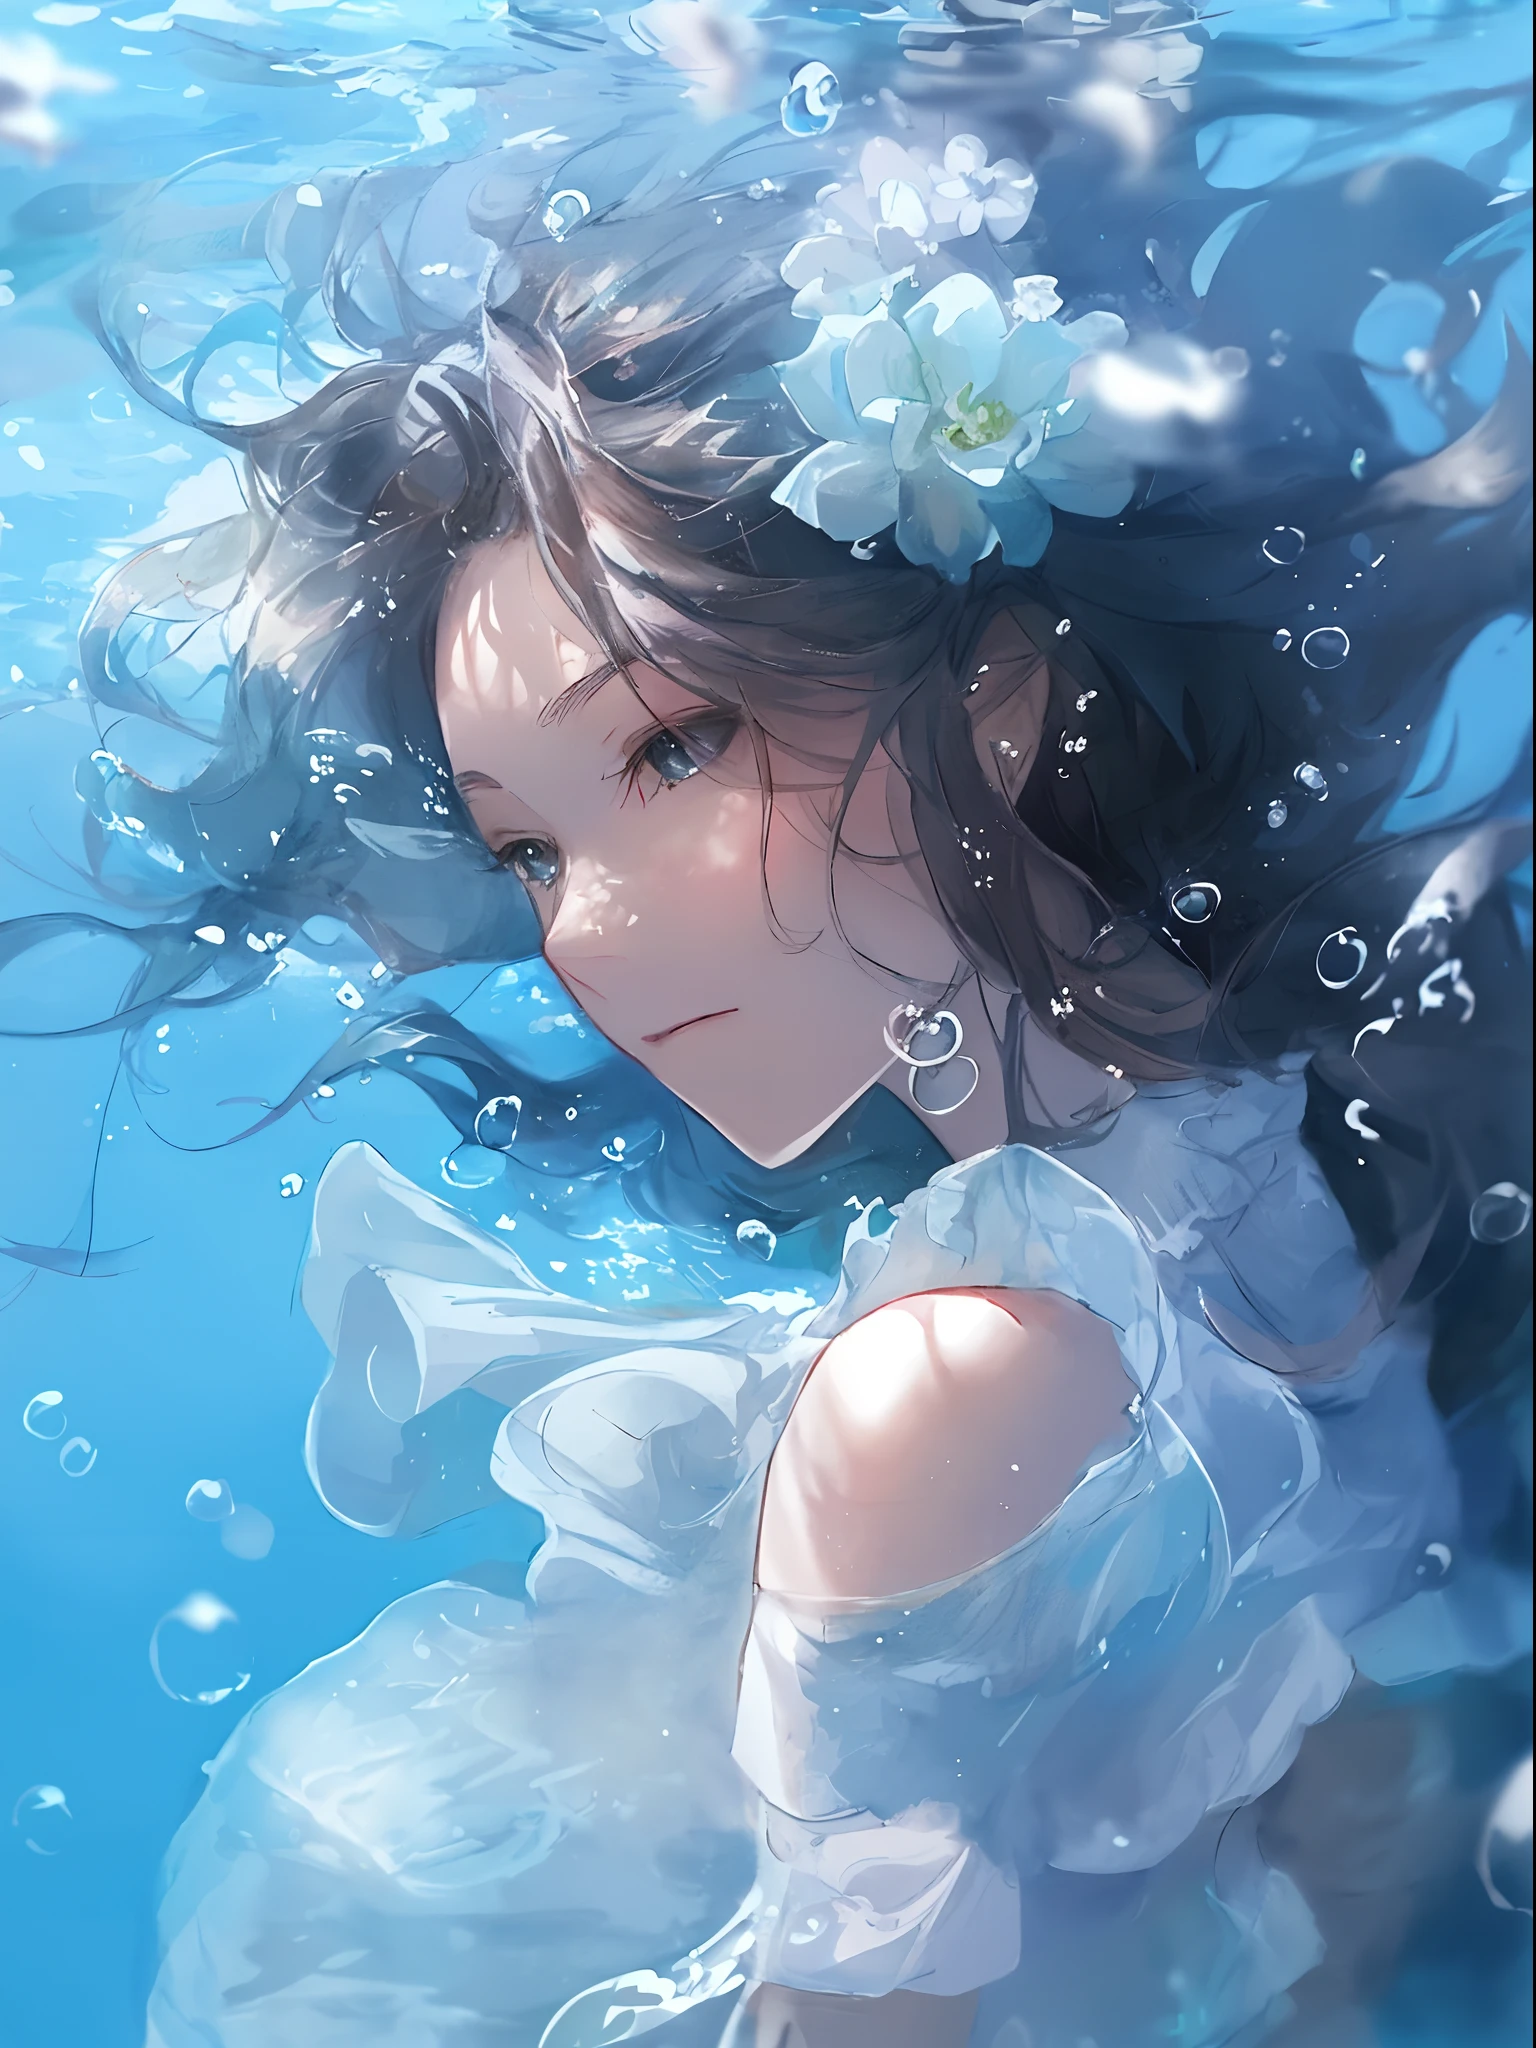 Close-up of a woman in a white dress under the water，wallpaper anime blue water，Guviz-style artwork，closeup fantasy with water magic，by Yang J，Guviz，a beautiful artwork illustration，Water Nymphs，beautiful digital artworks，beautiful digital illustration，By Li Song，In the art style of Beauvot，a beautiful anime portrait,Wetwatercolor